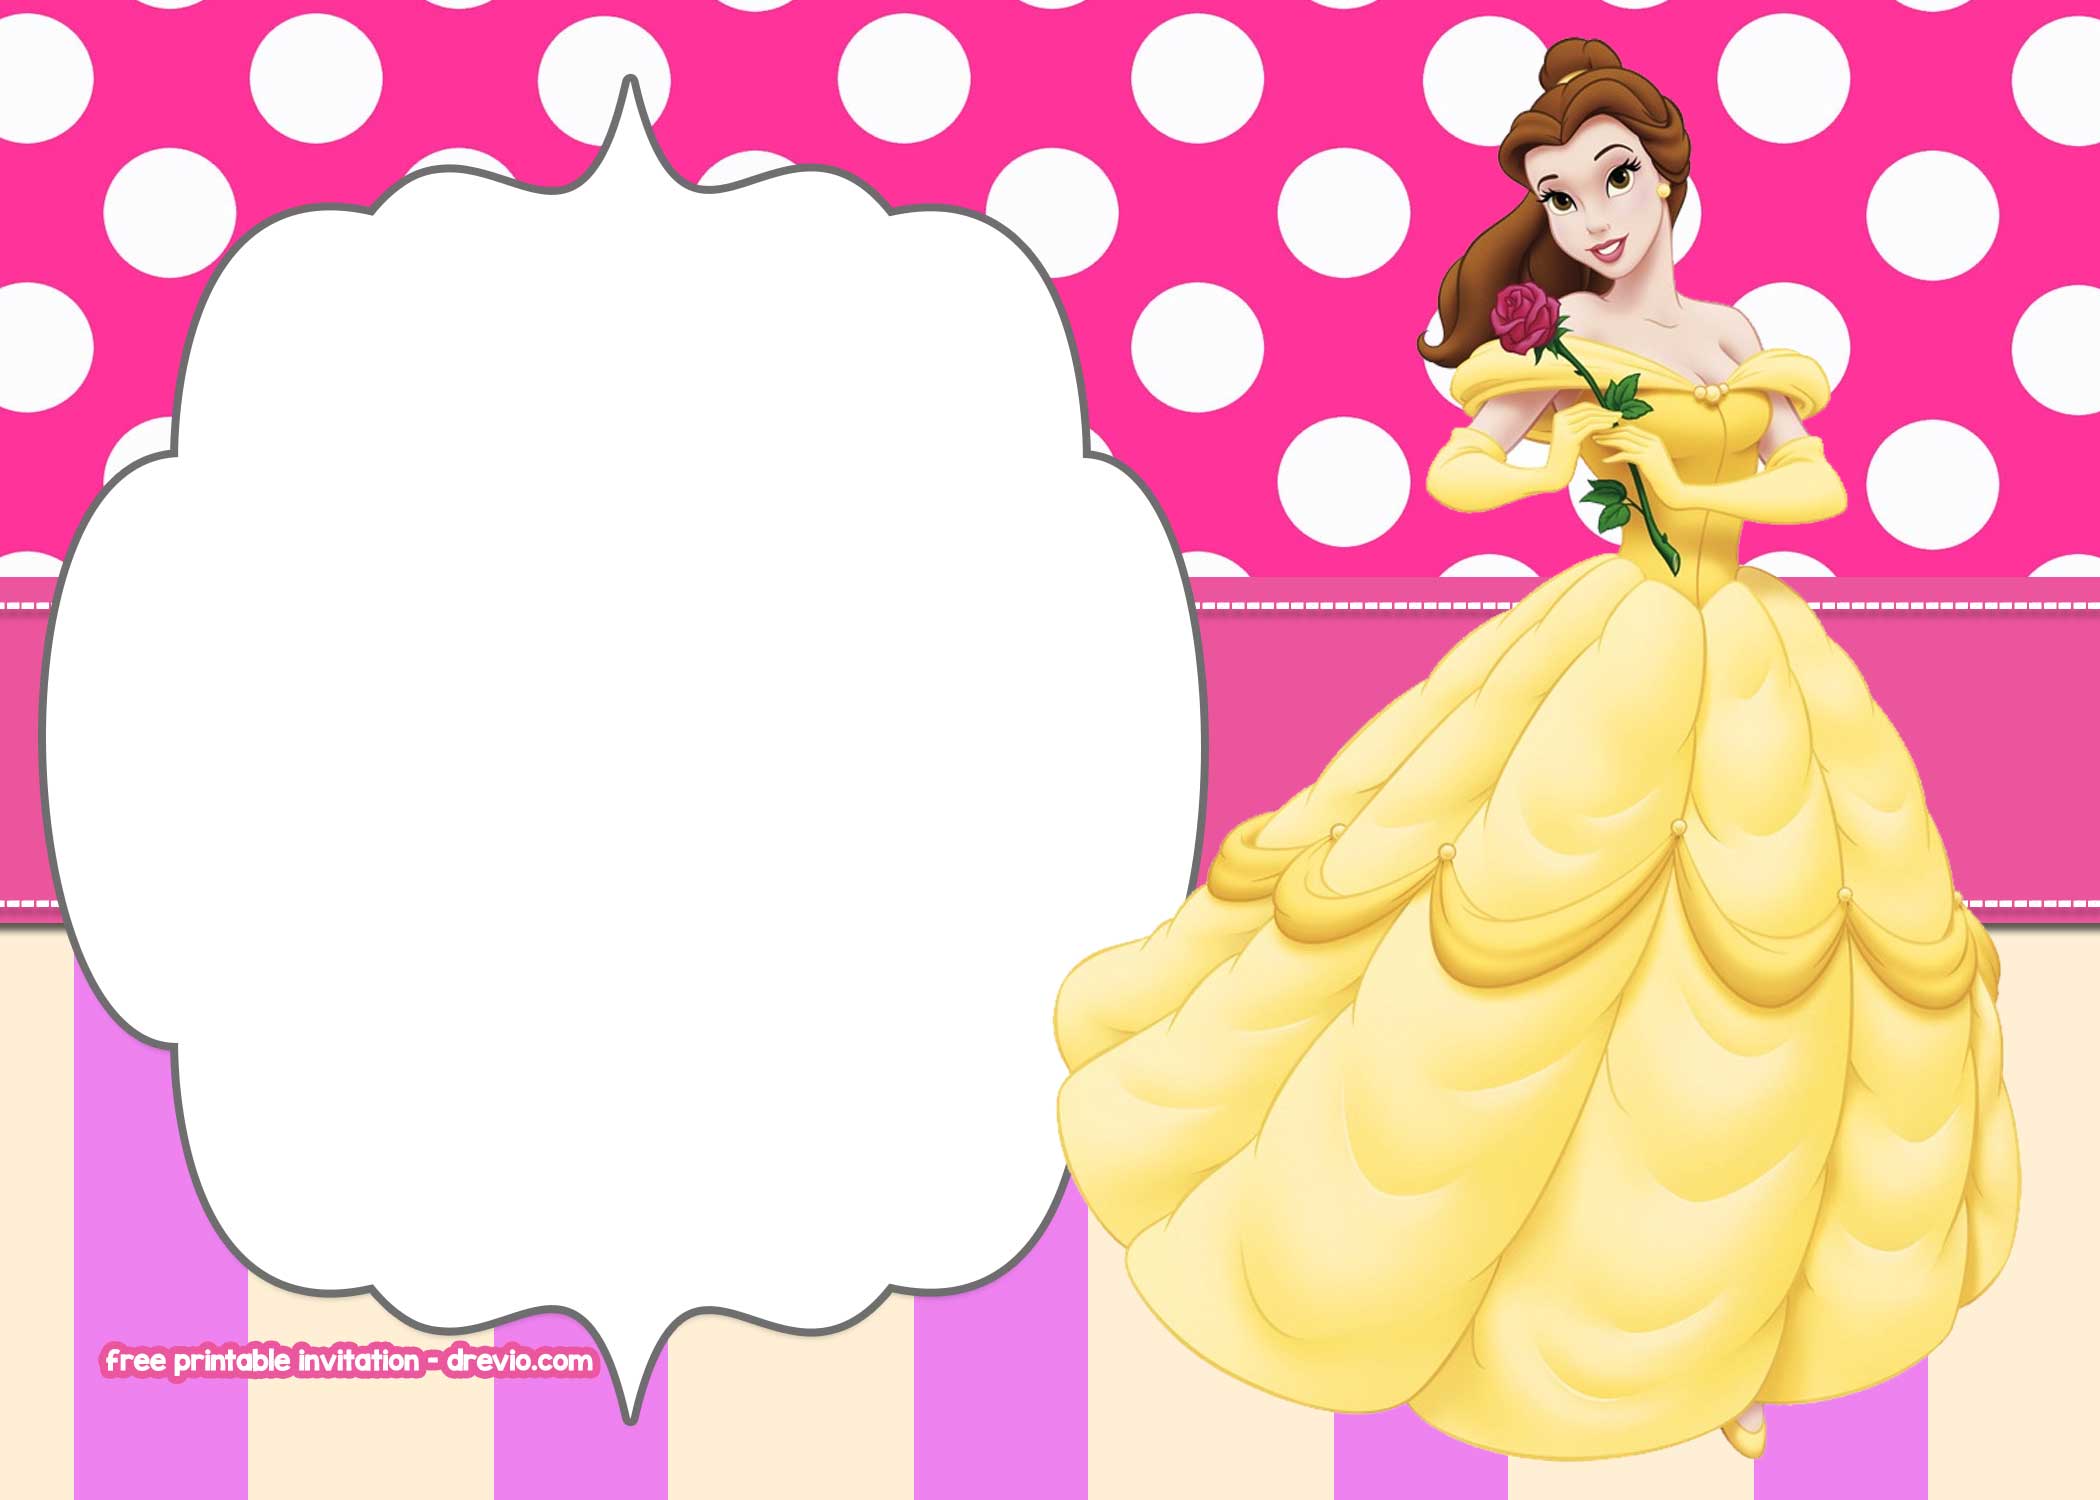 FREE Printable Princess Belle Beauty and the Beast invitation blank